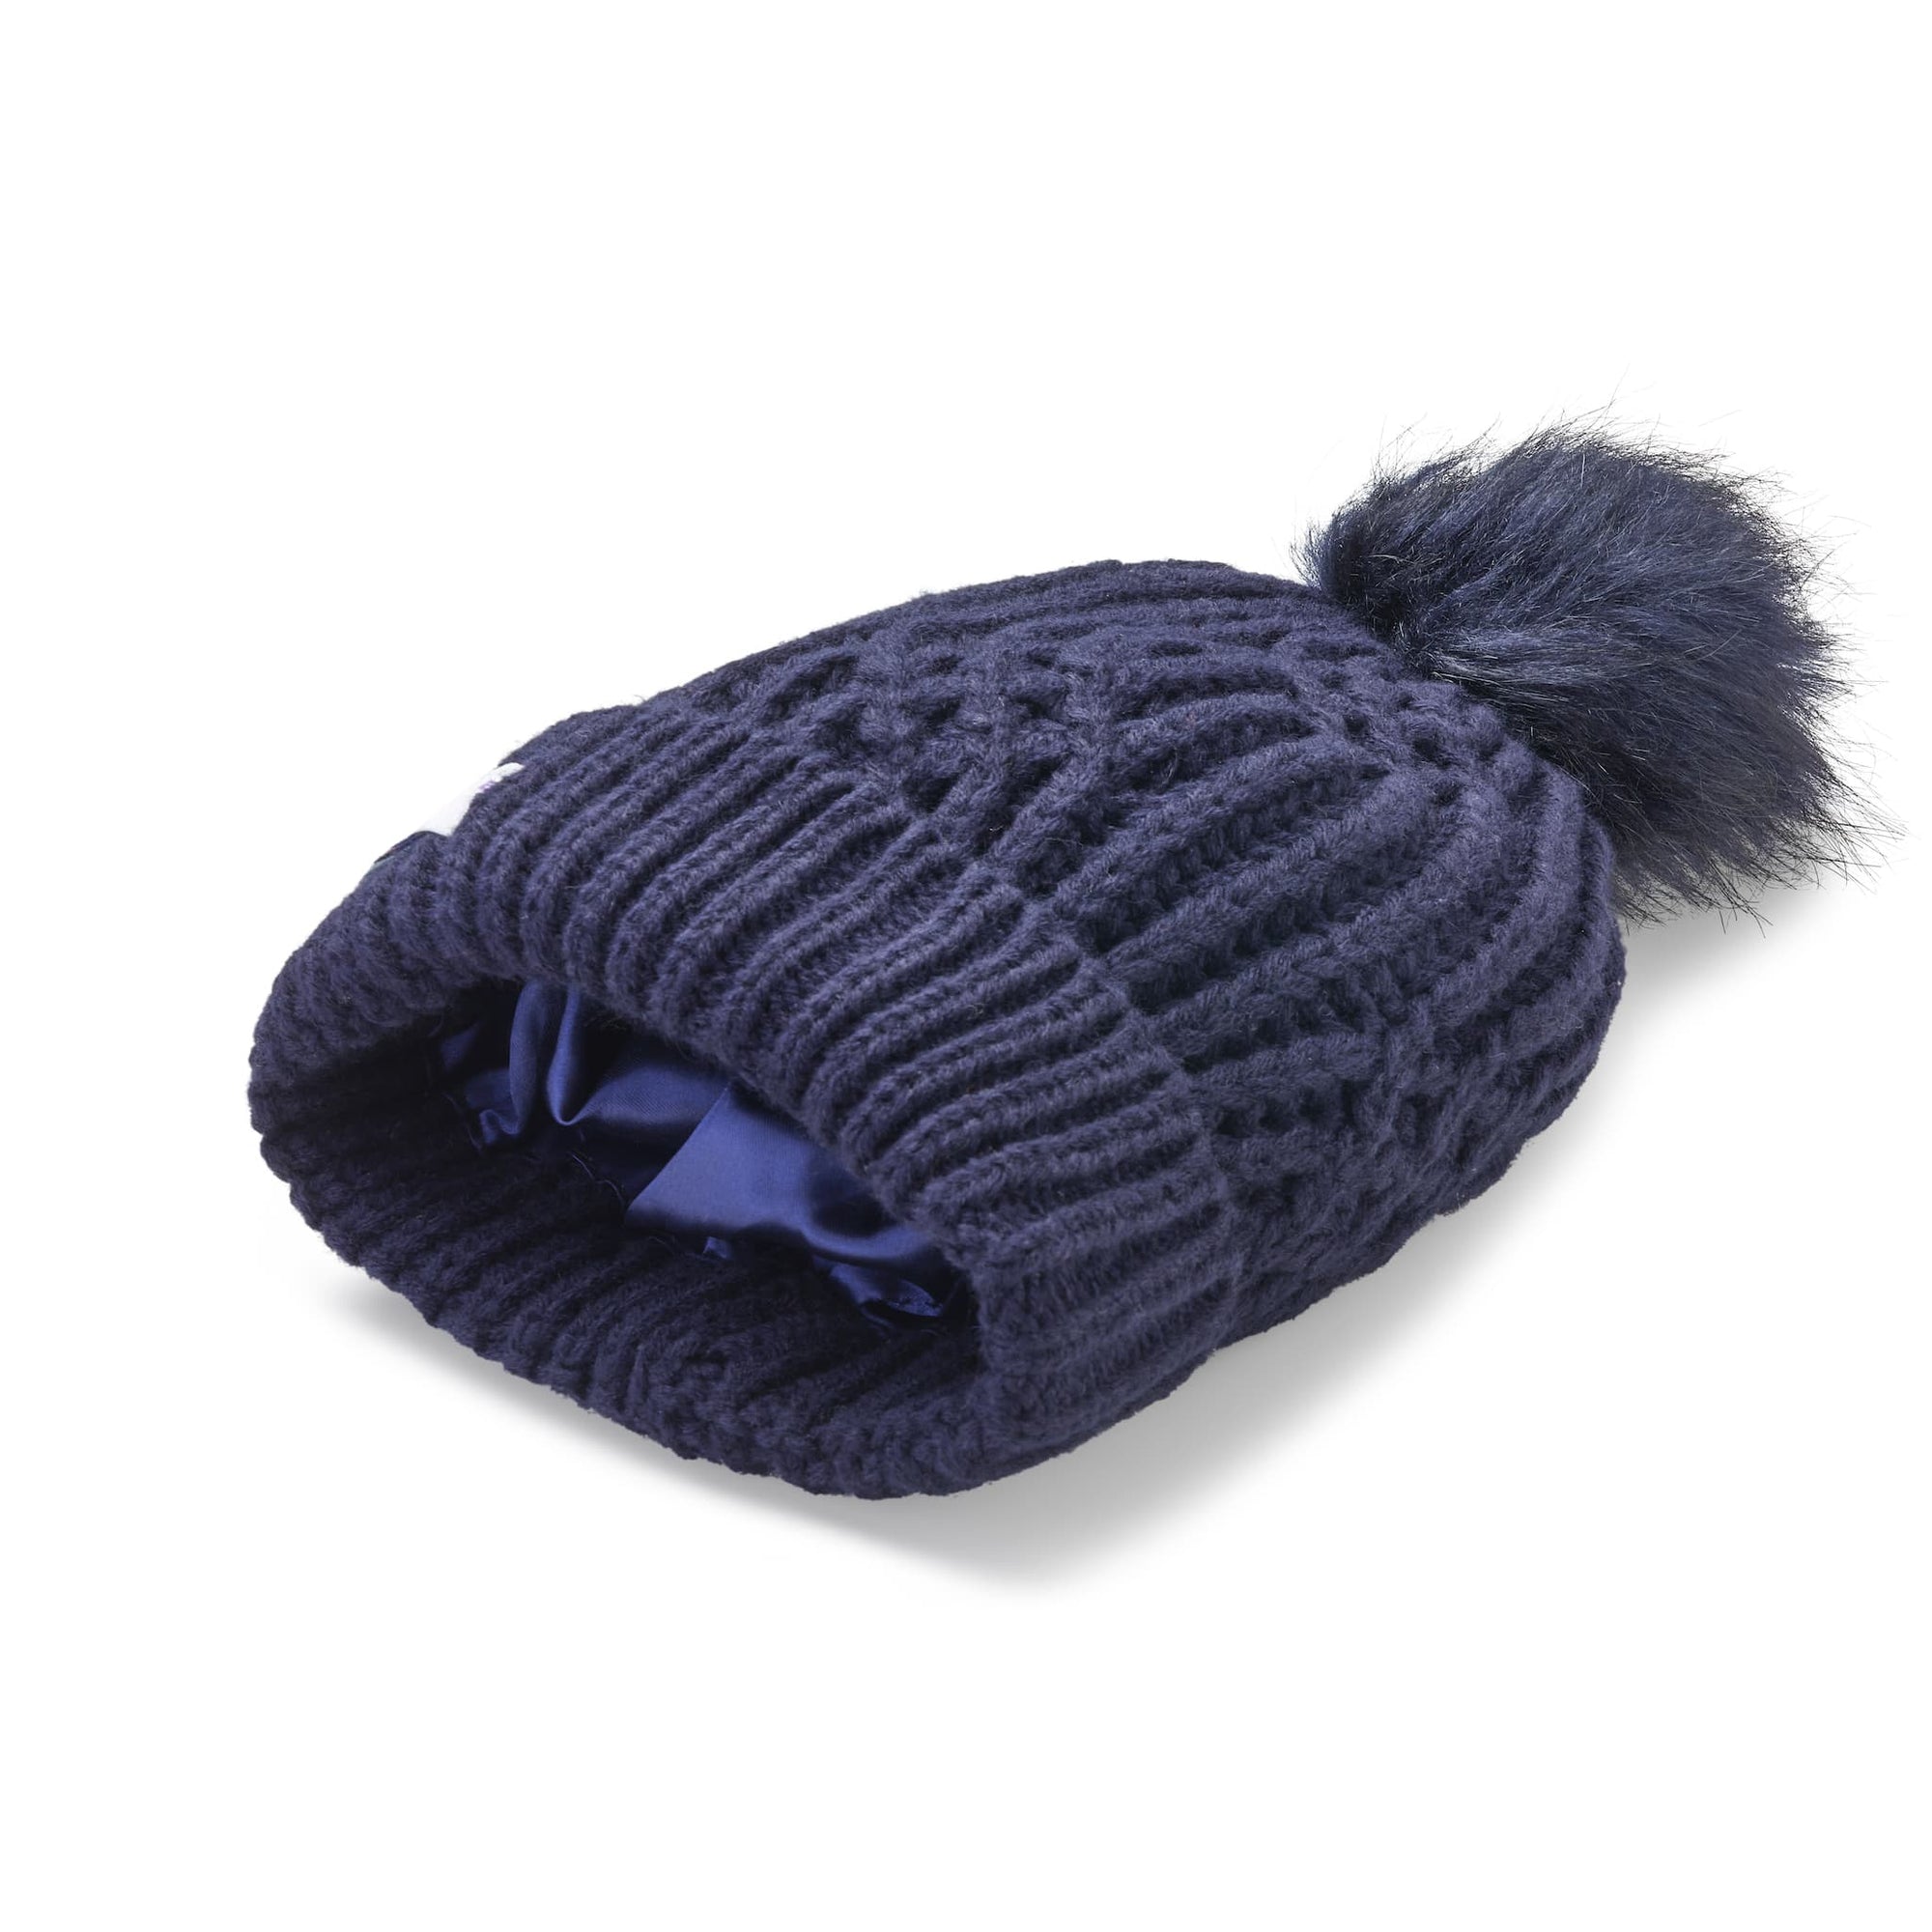 Little Curls Satin Lined Knitted Beanie Hat - Navy with Pom Pom - Only Curls